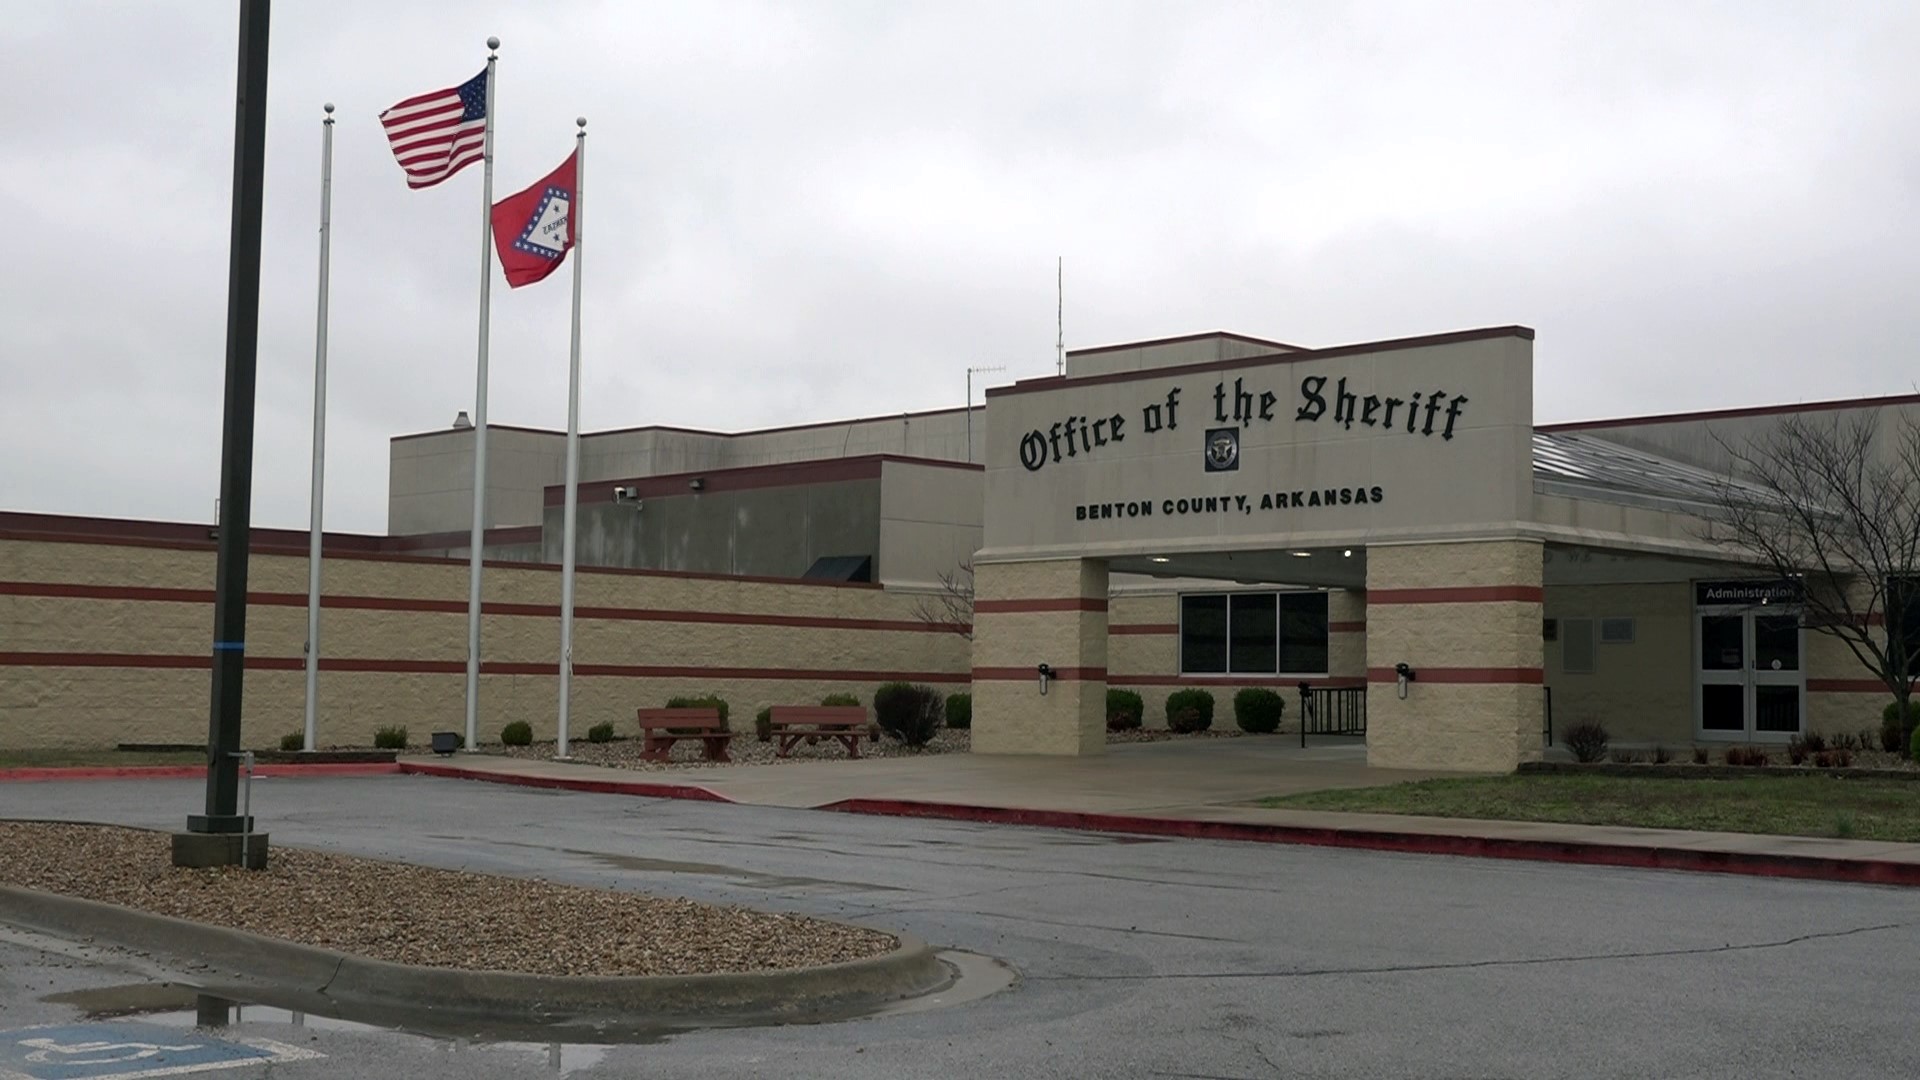 JUST YESTERDAY THE CITY OF BENTONVILLE APPROVED A WAIVER THAT WILL LET THE BENTON COUNTY JAIL ADD MORE FACILITIES TO THE PROPERTY...